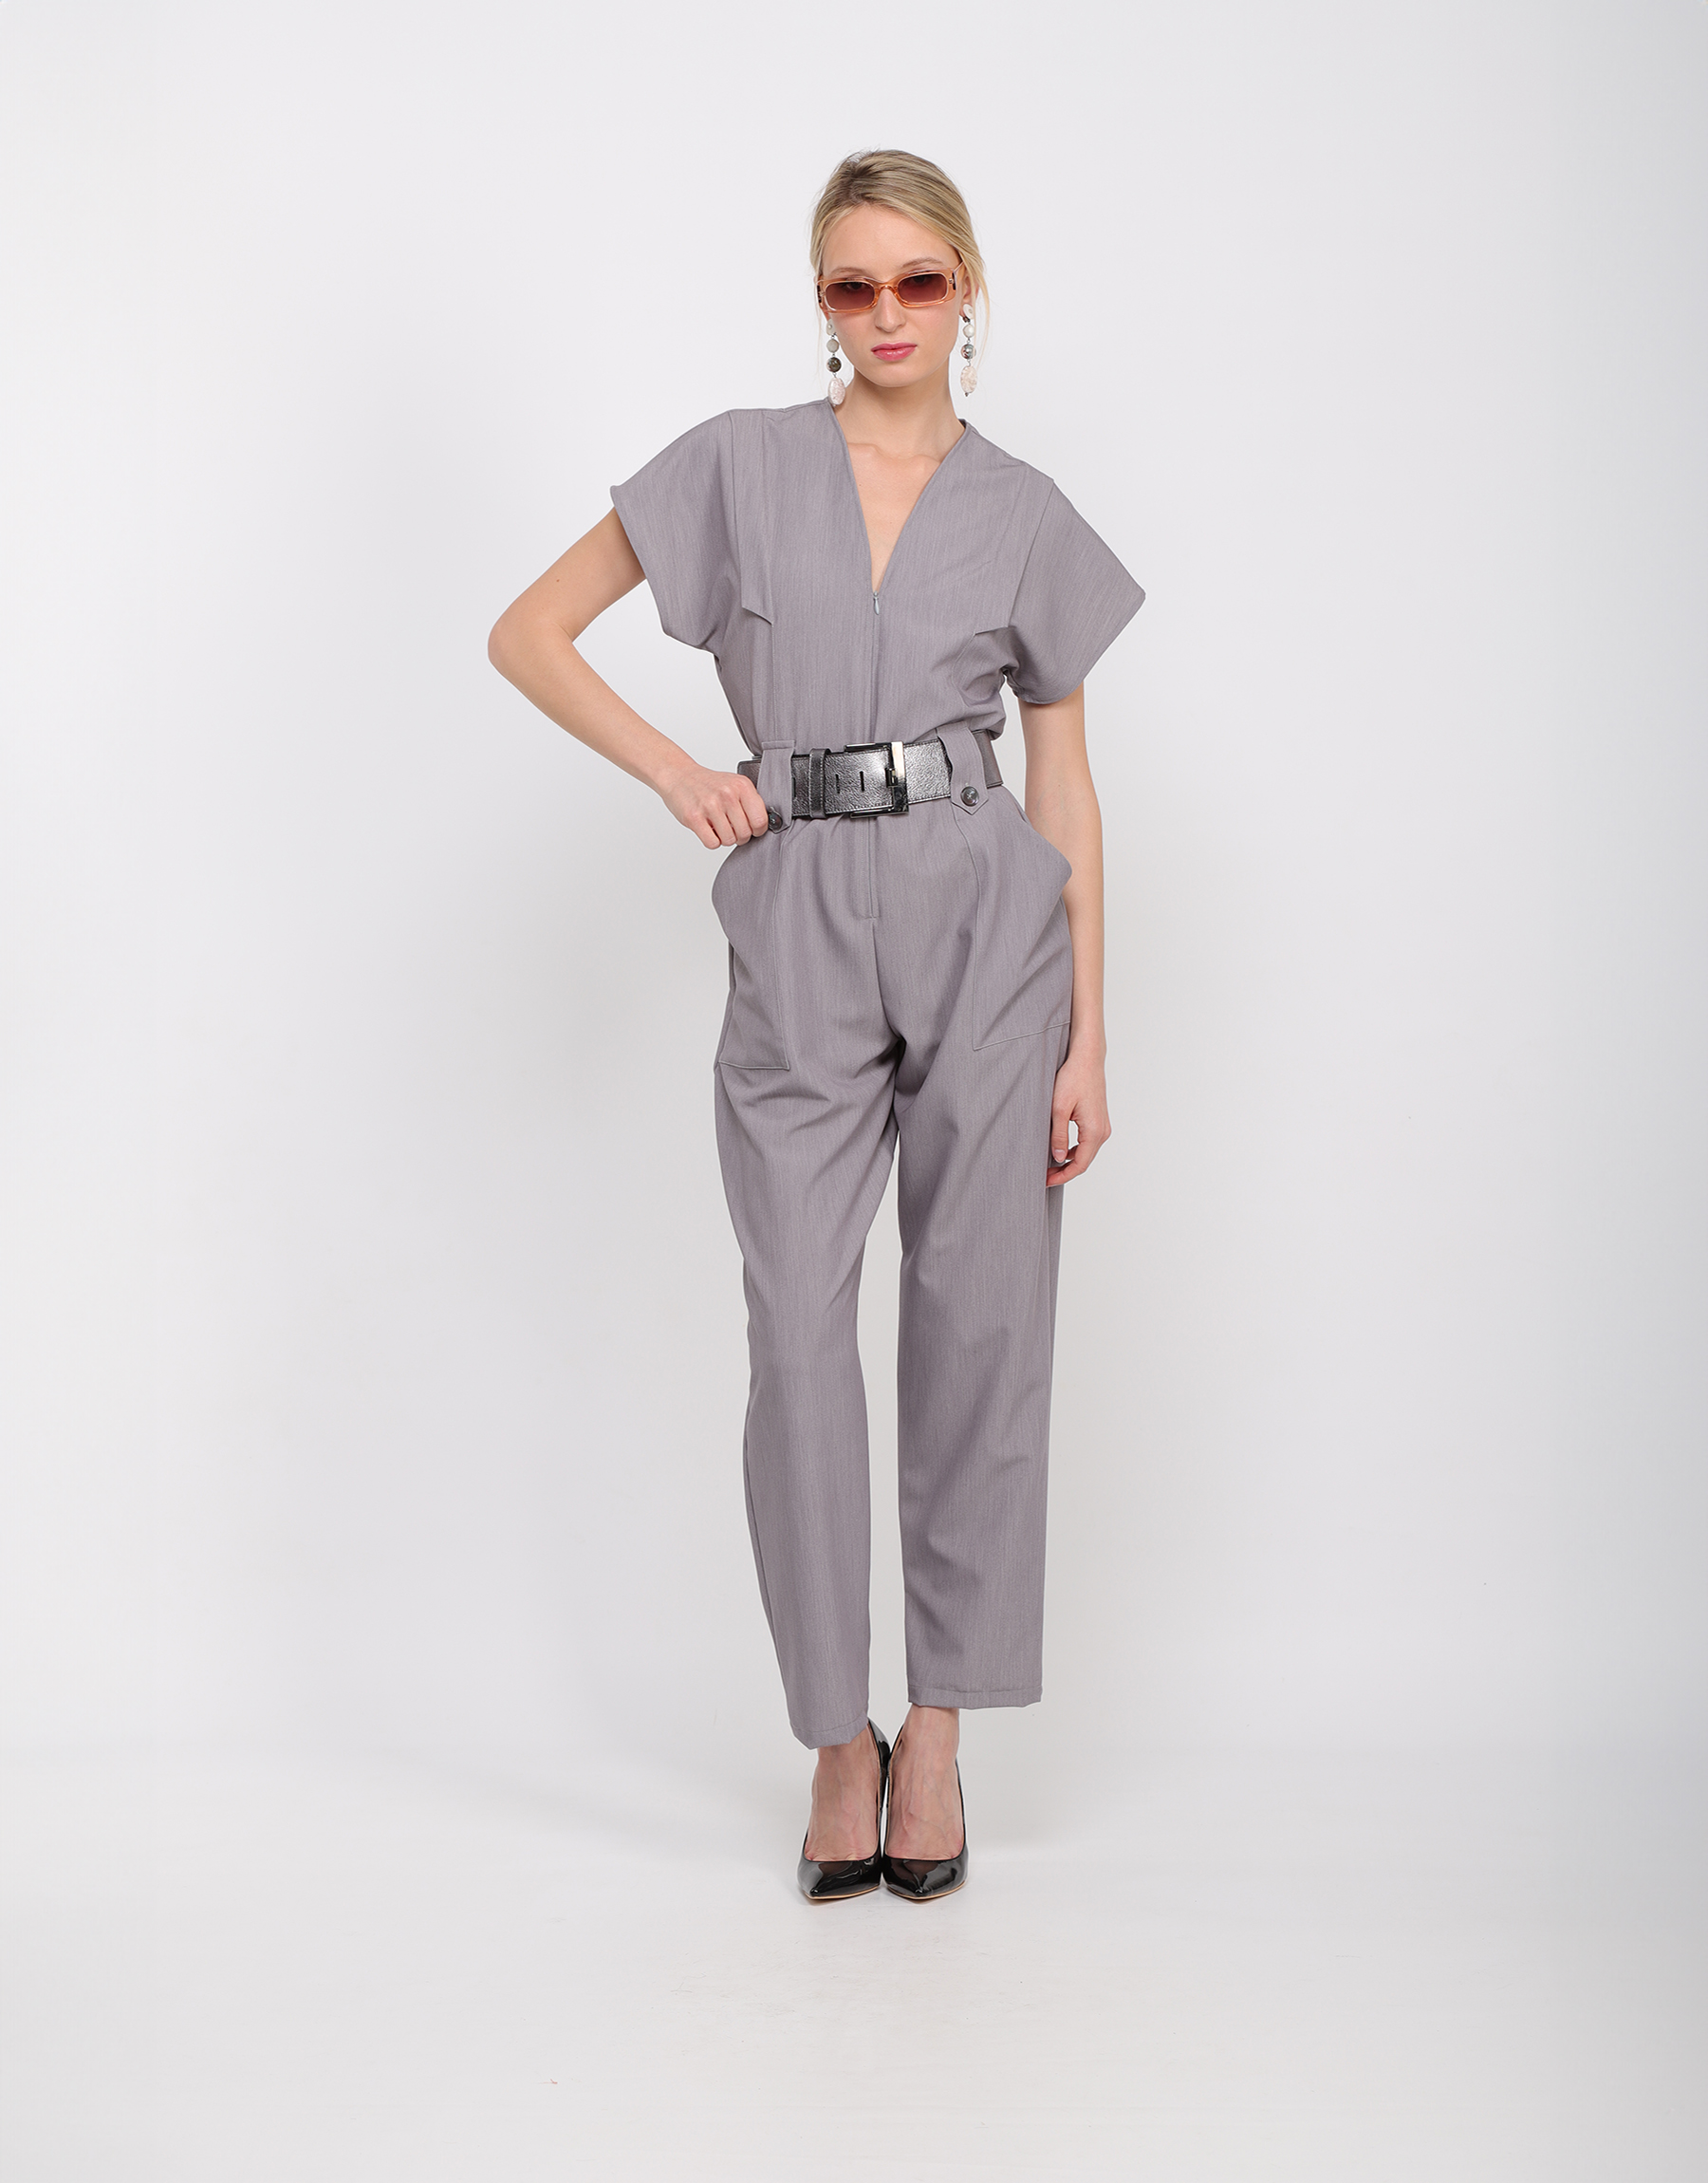 Short-sleeved jumpsuit in pearl grey cotton and viscose